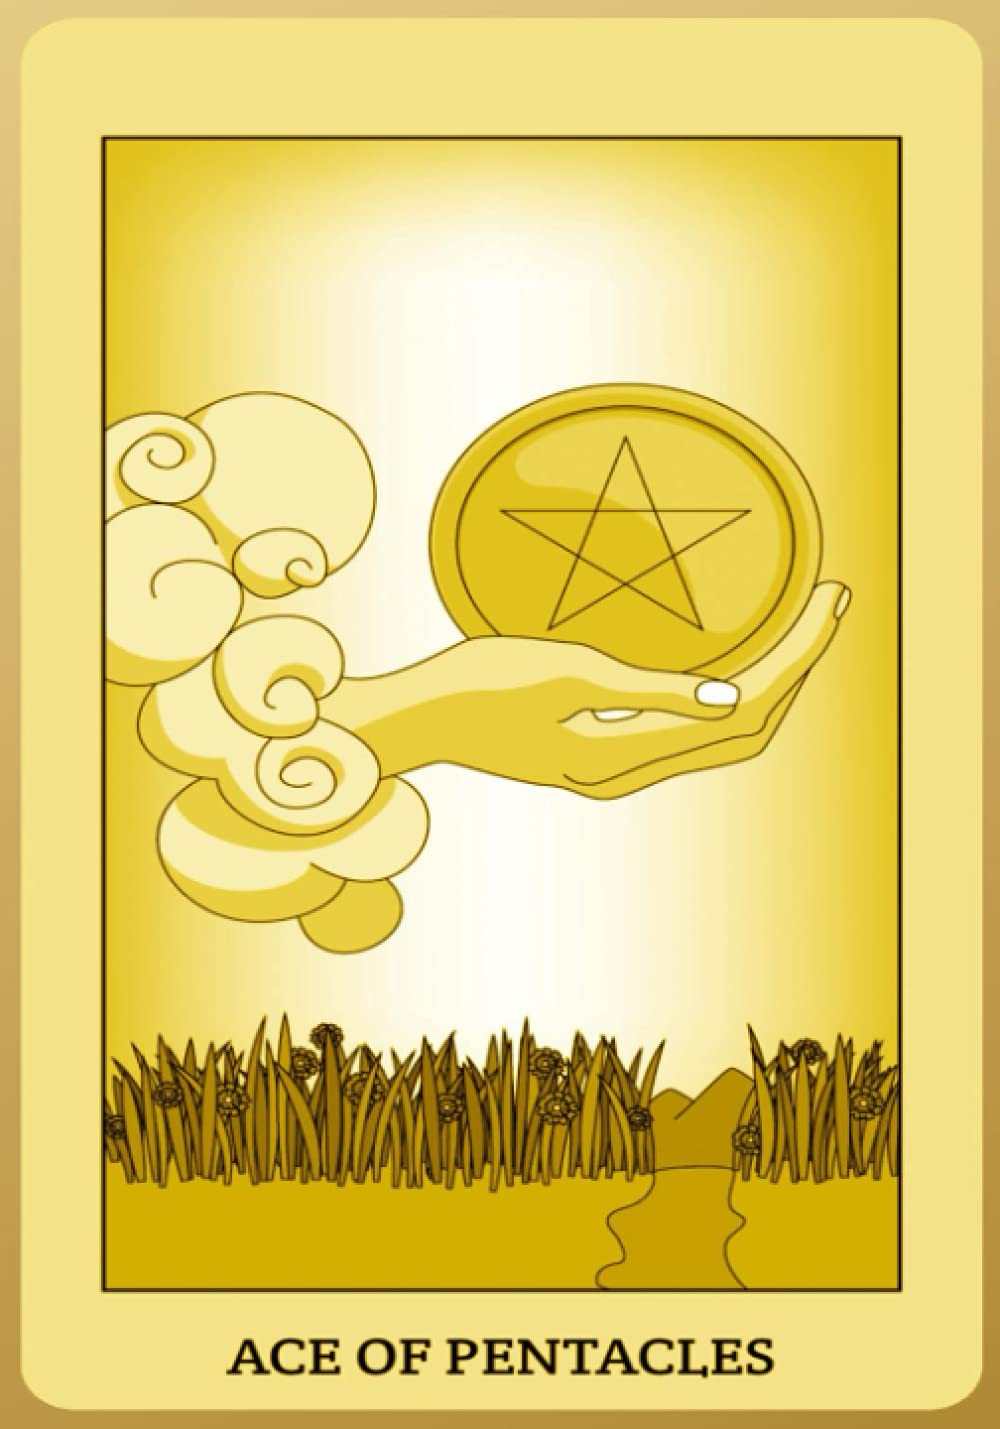 Ace of pentacles